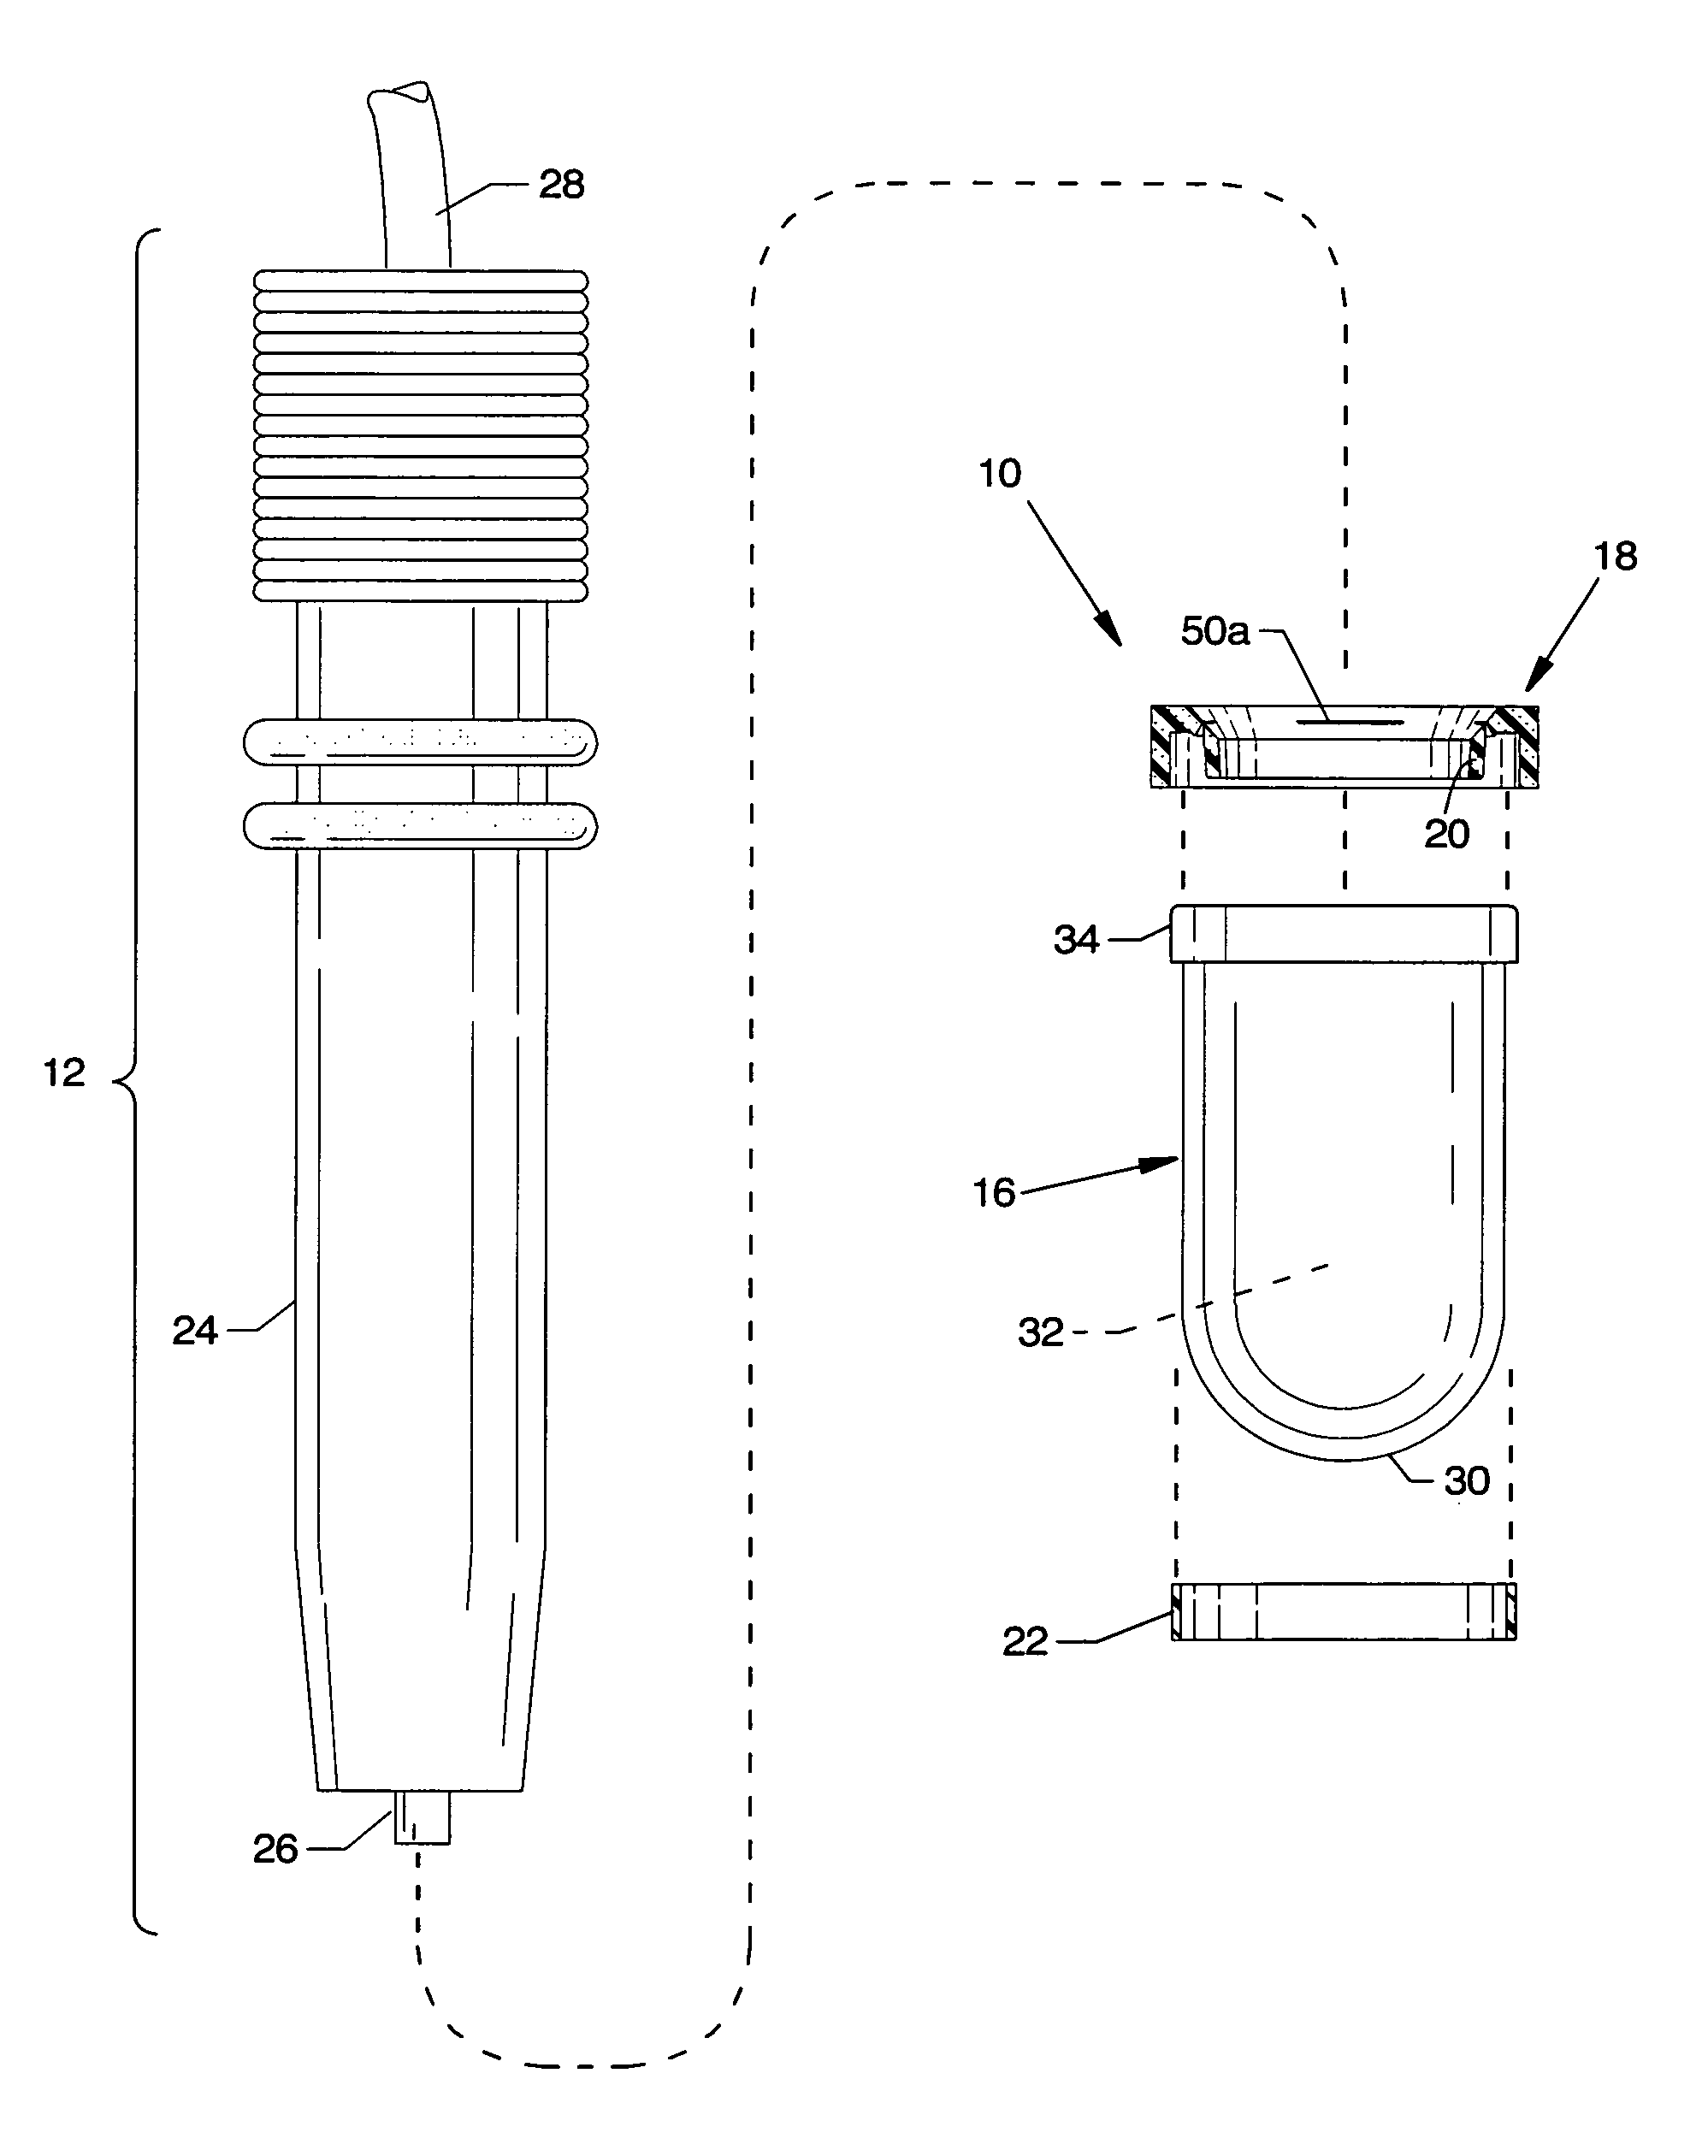 Immersion bag system for use with an ultrasound probe